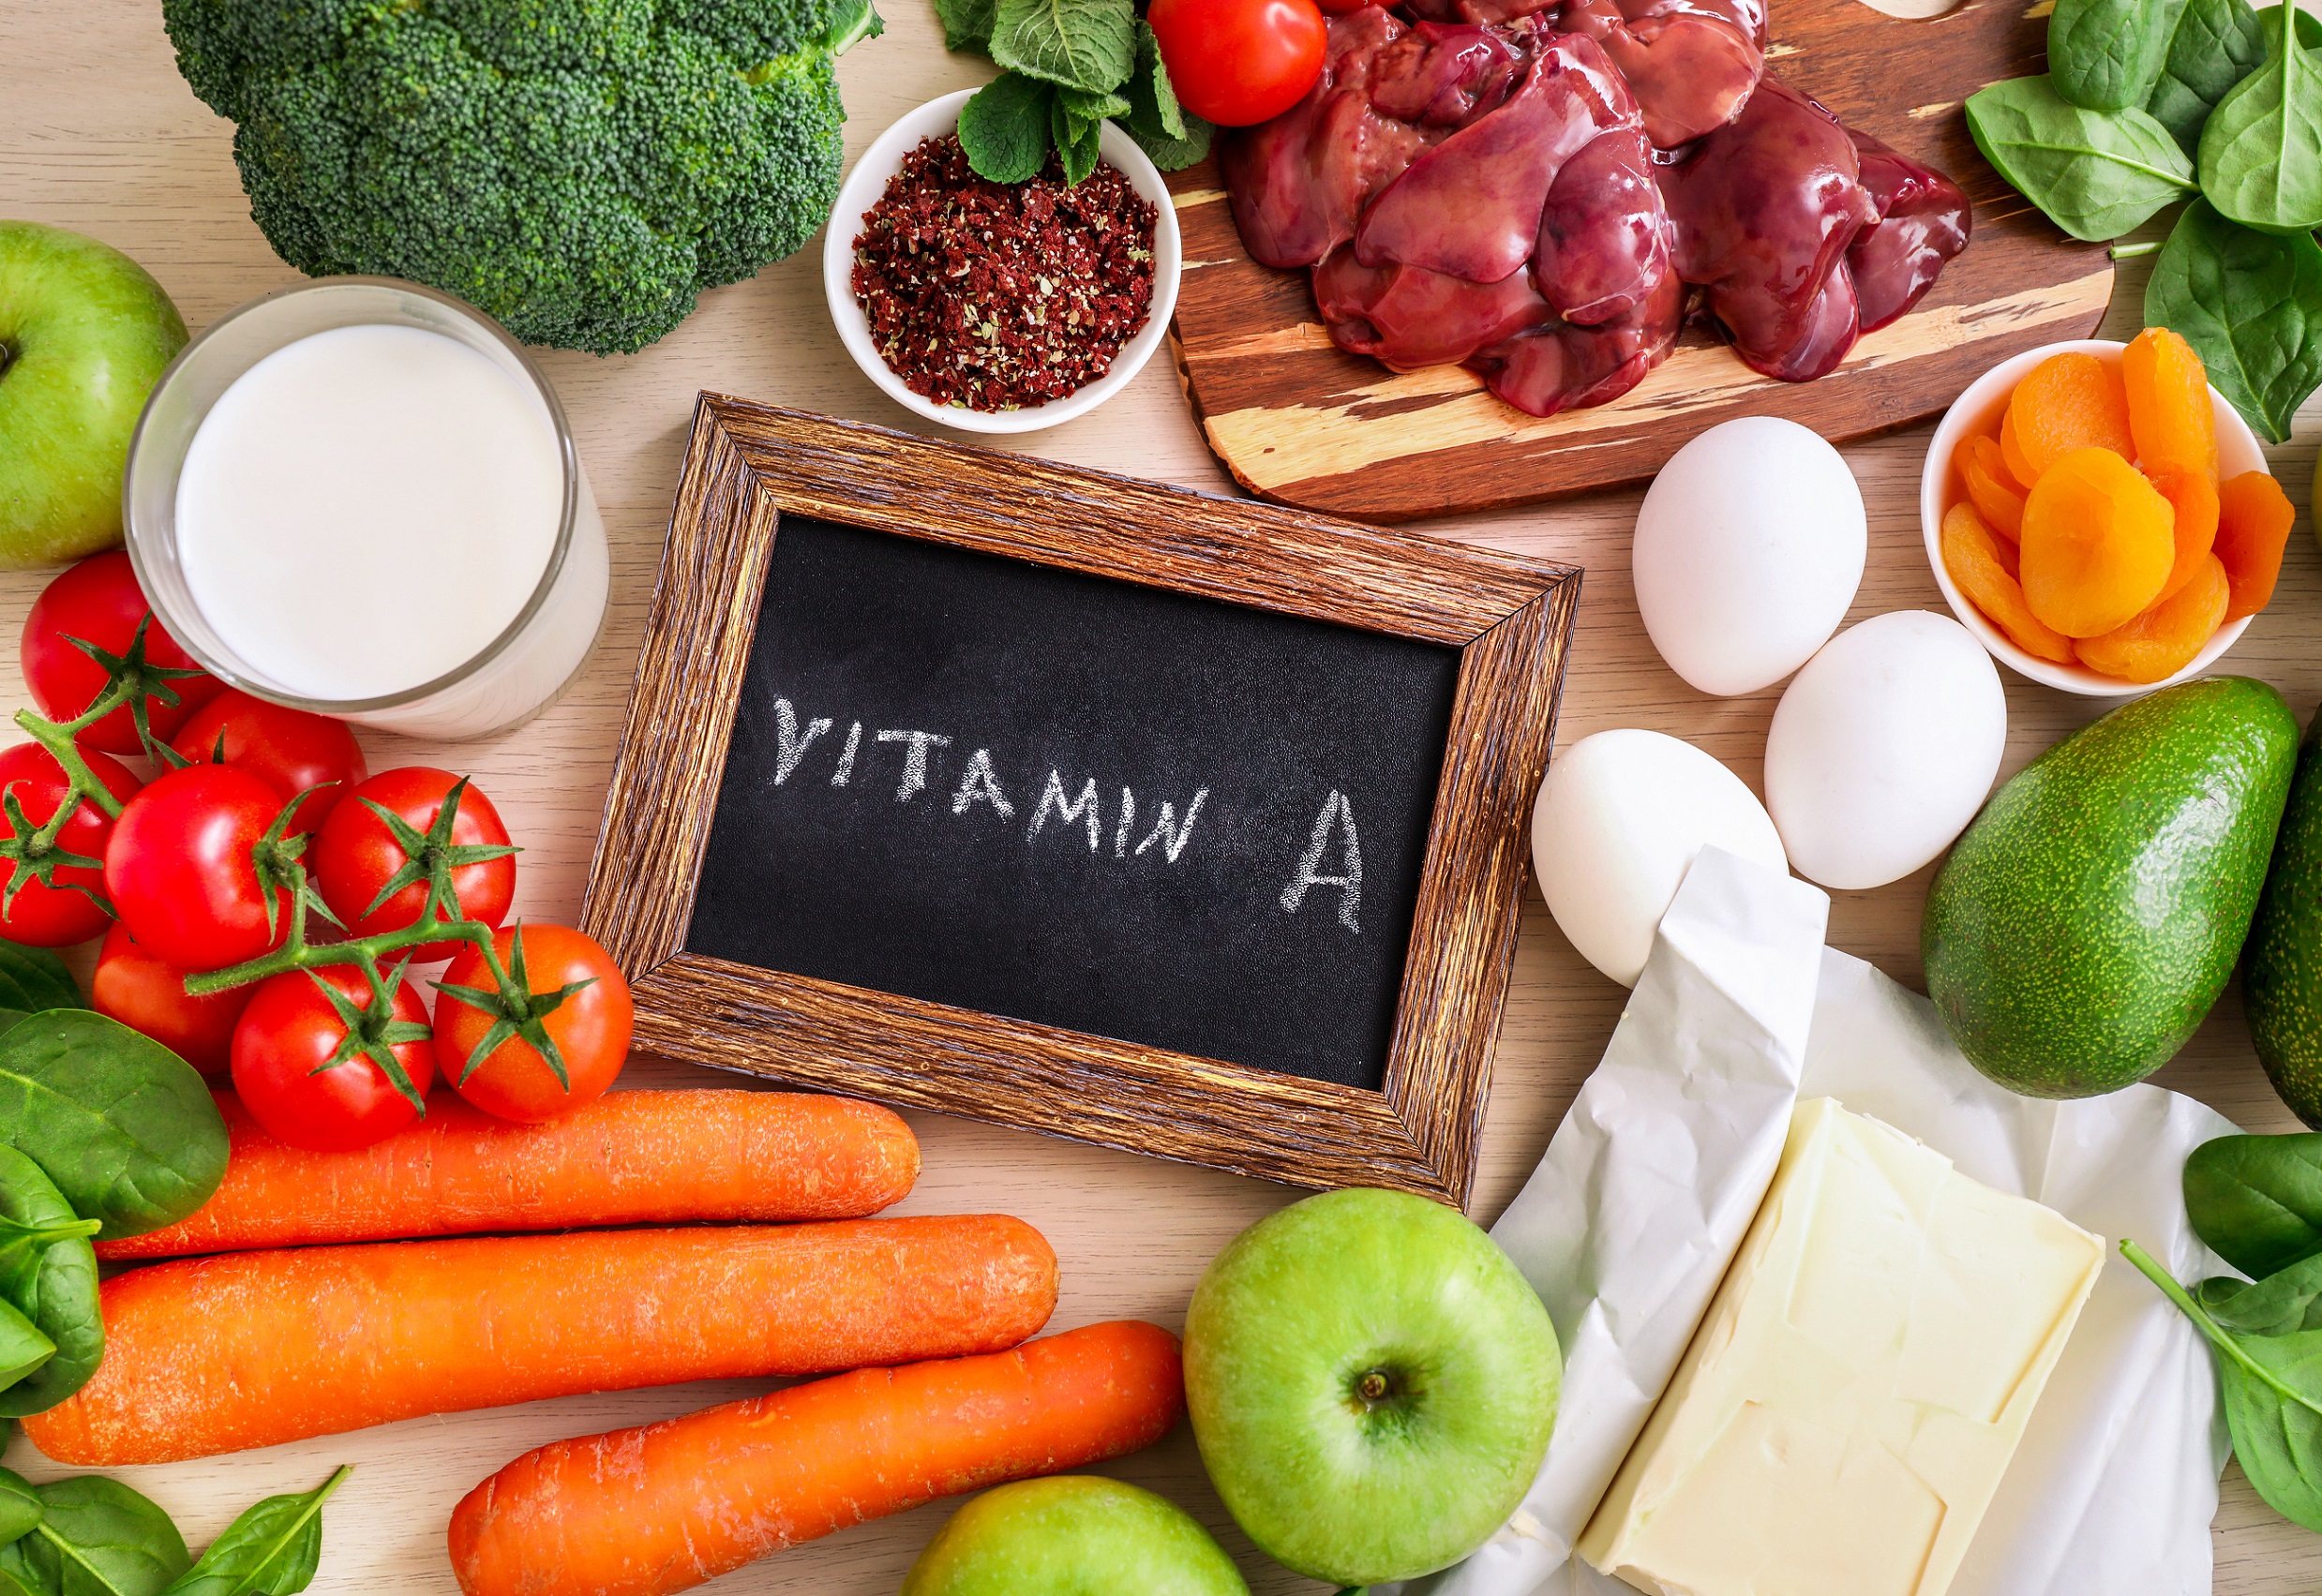 Nutrition: Vitamin A is so important